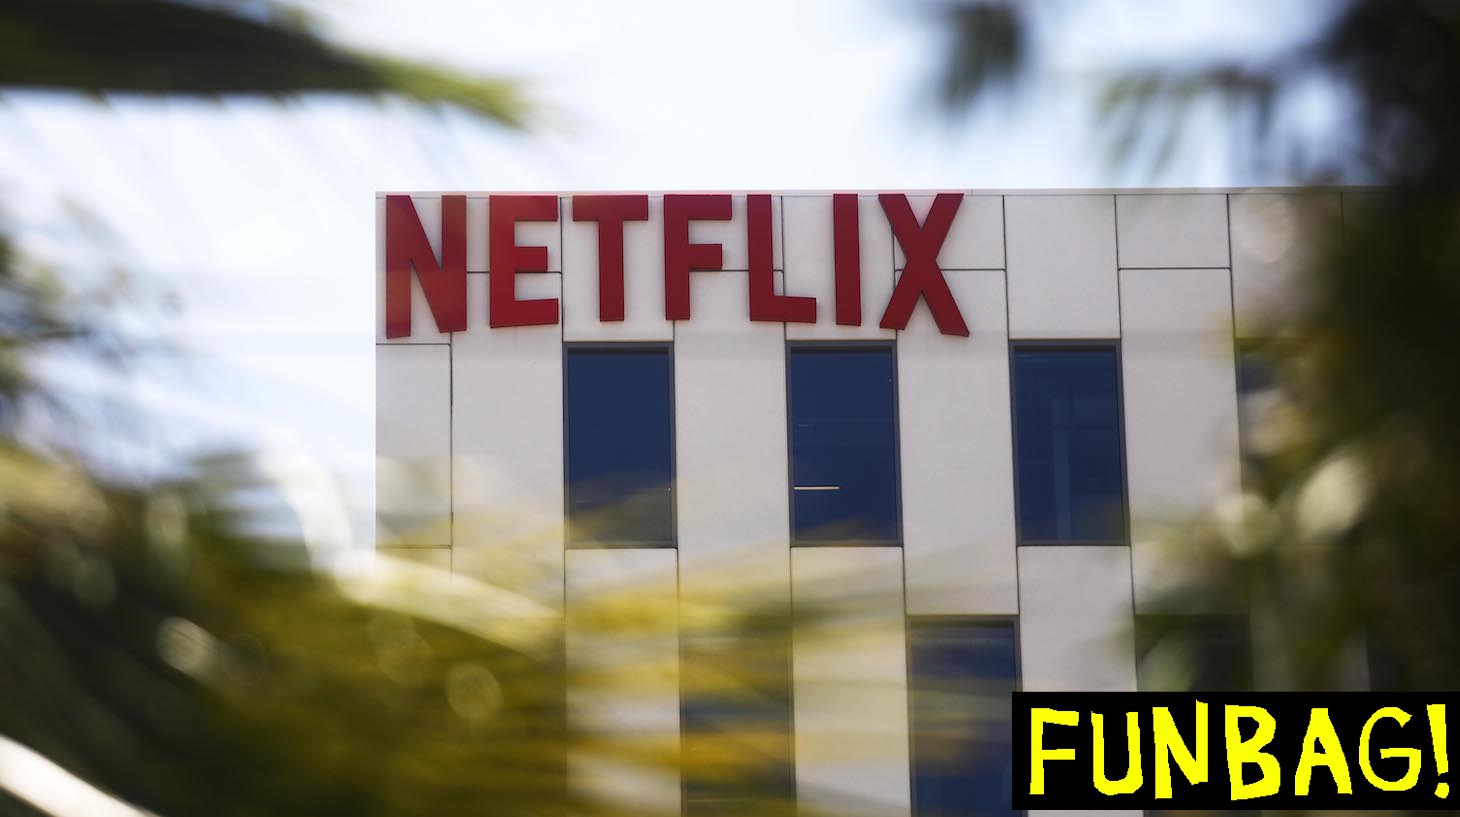 LOS ANGELES, CALIFORNIA - MAY 29: The Netflix logo is displayed at Netflix offices on Sunset Boulevard on May 29, 2019 in Los Angeles, California. Netflix chief content officer Ted Sarandos said the company will reconsider their 'entire investment' in Georgia if a strict new abortion law is not overturned in the state. According to state data, the film industry in Georgia contributed $2.7 billion in direct spending while supporting 92,000 local jobs. (Photo by Mario Tama/Getty Images)